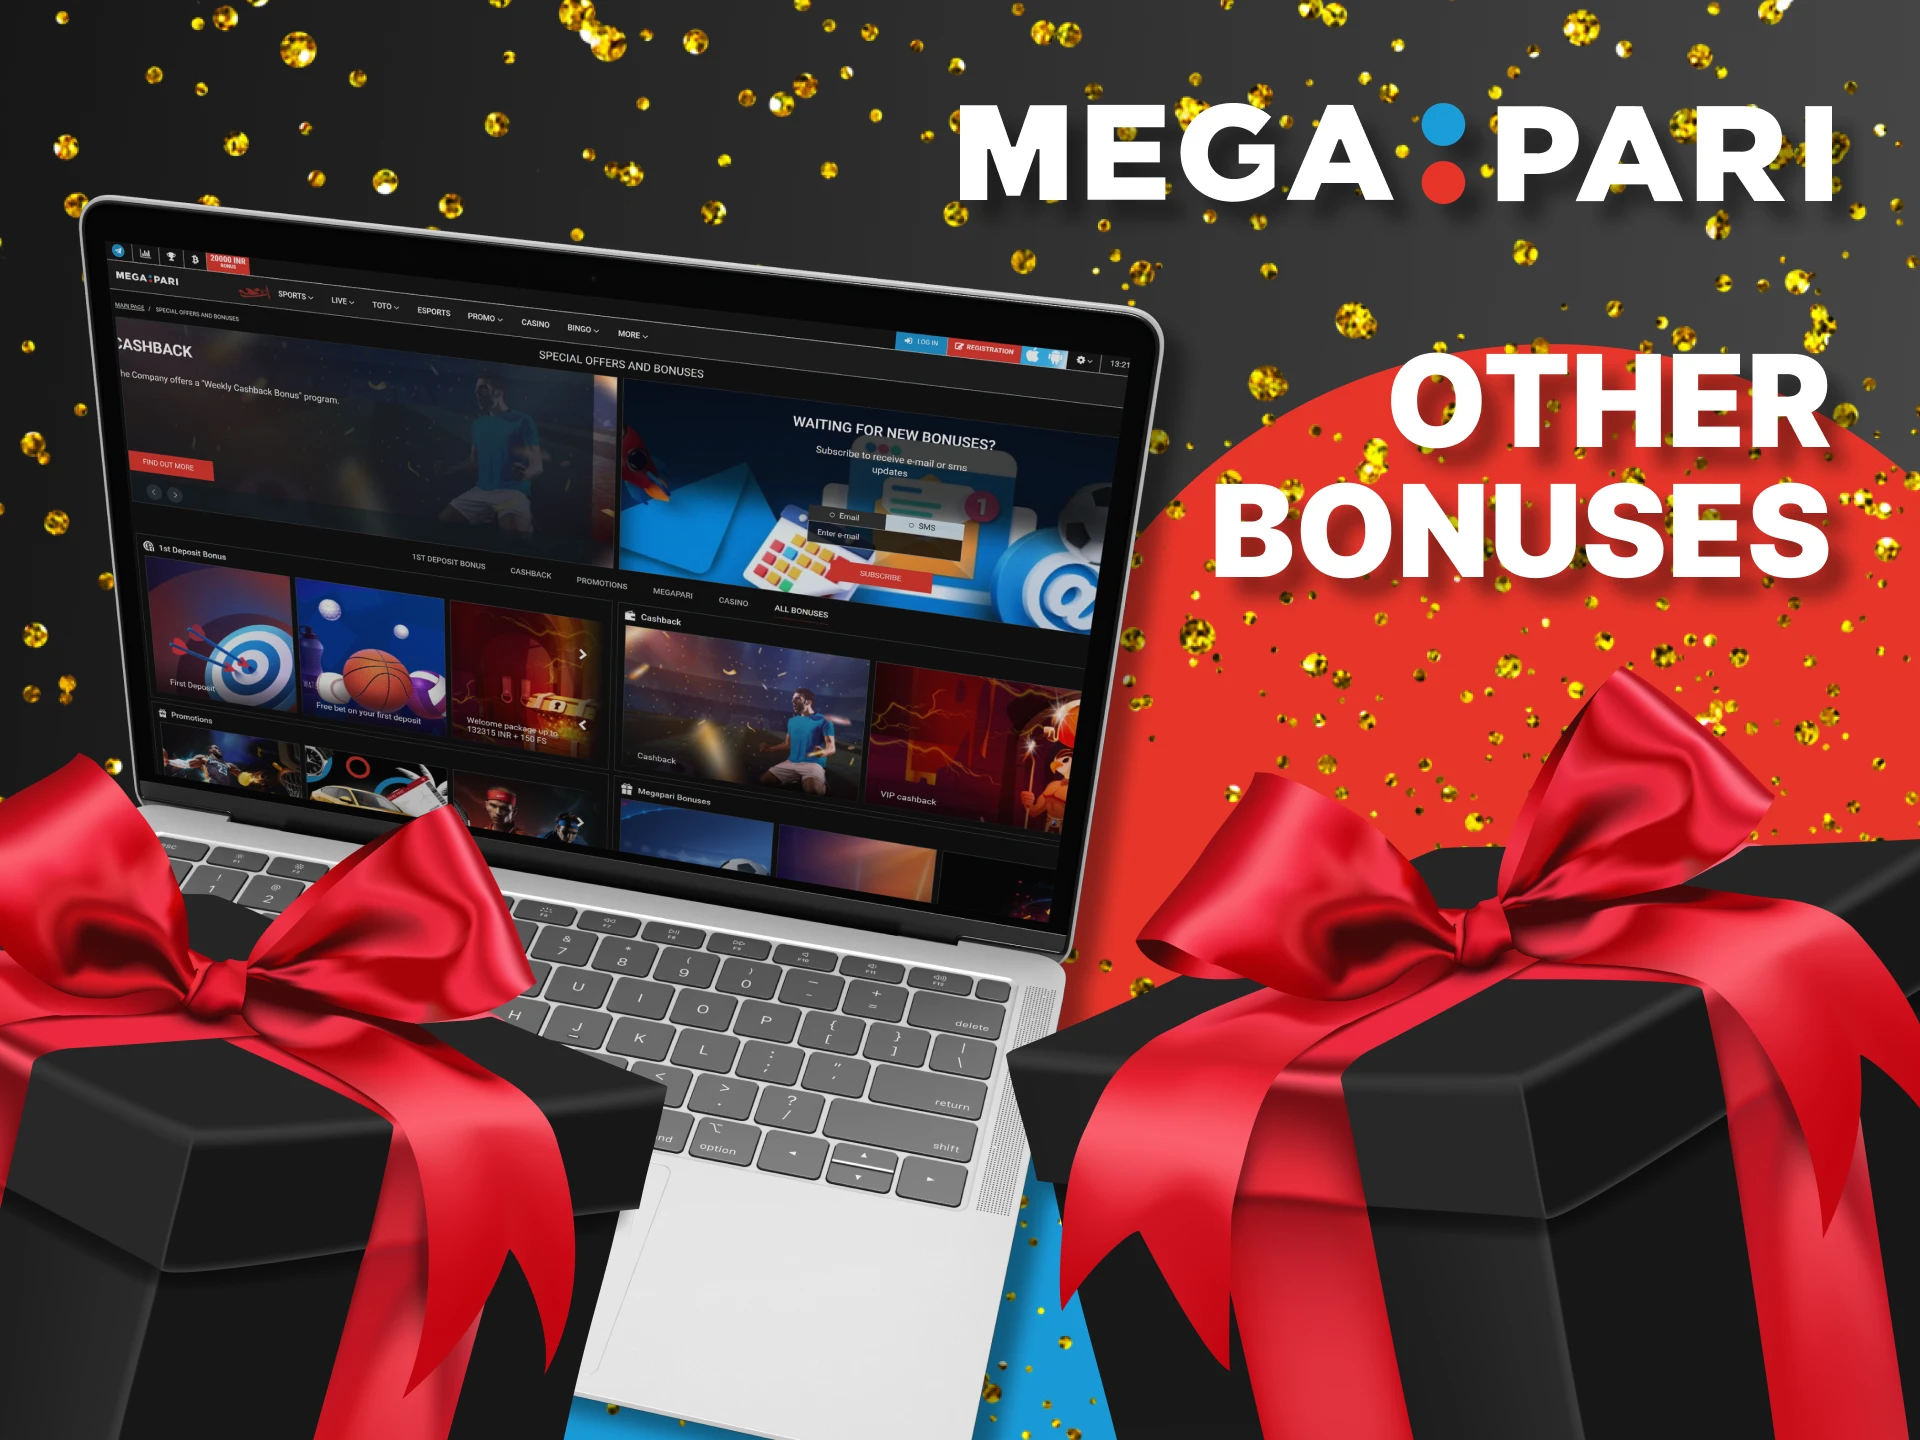 Learn more about other Megapari bonuses.